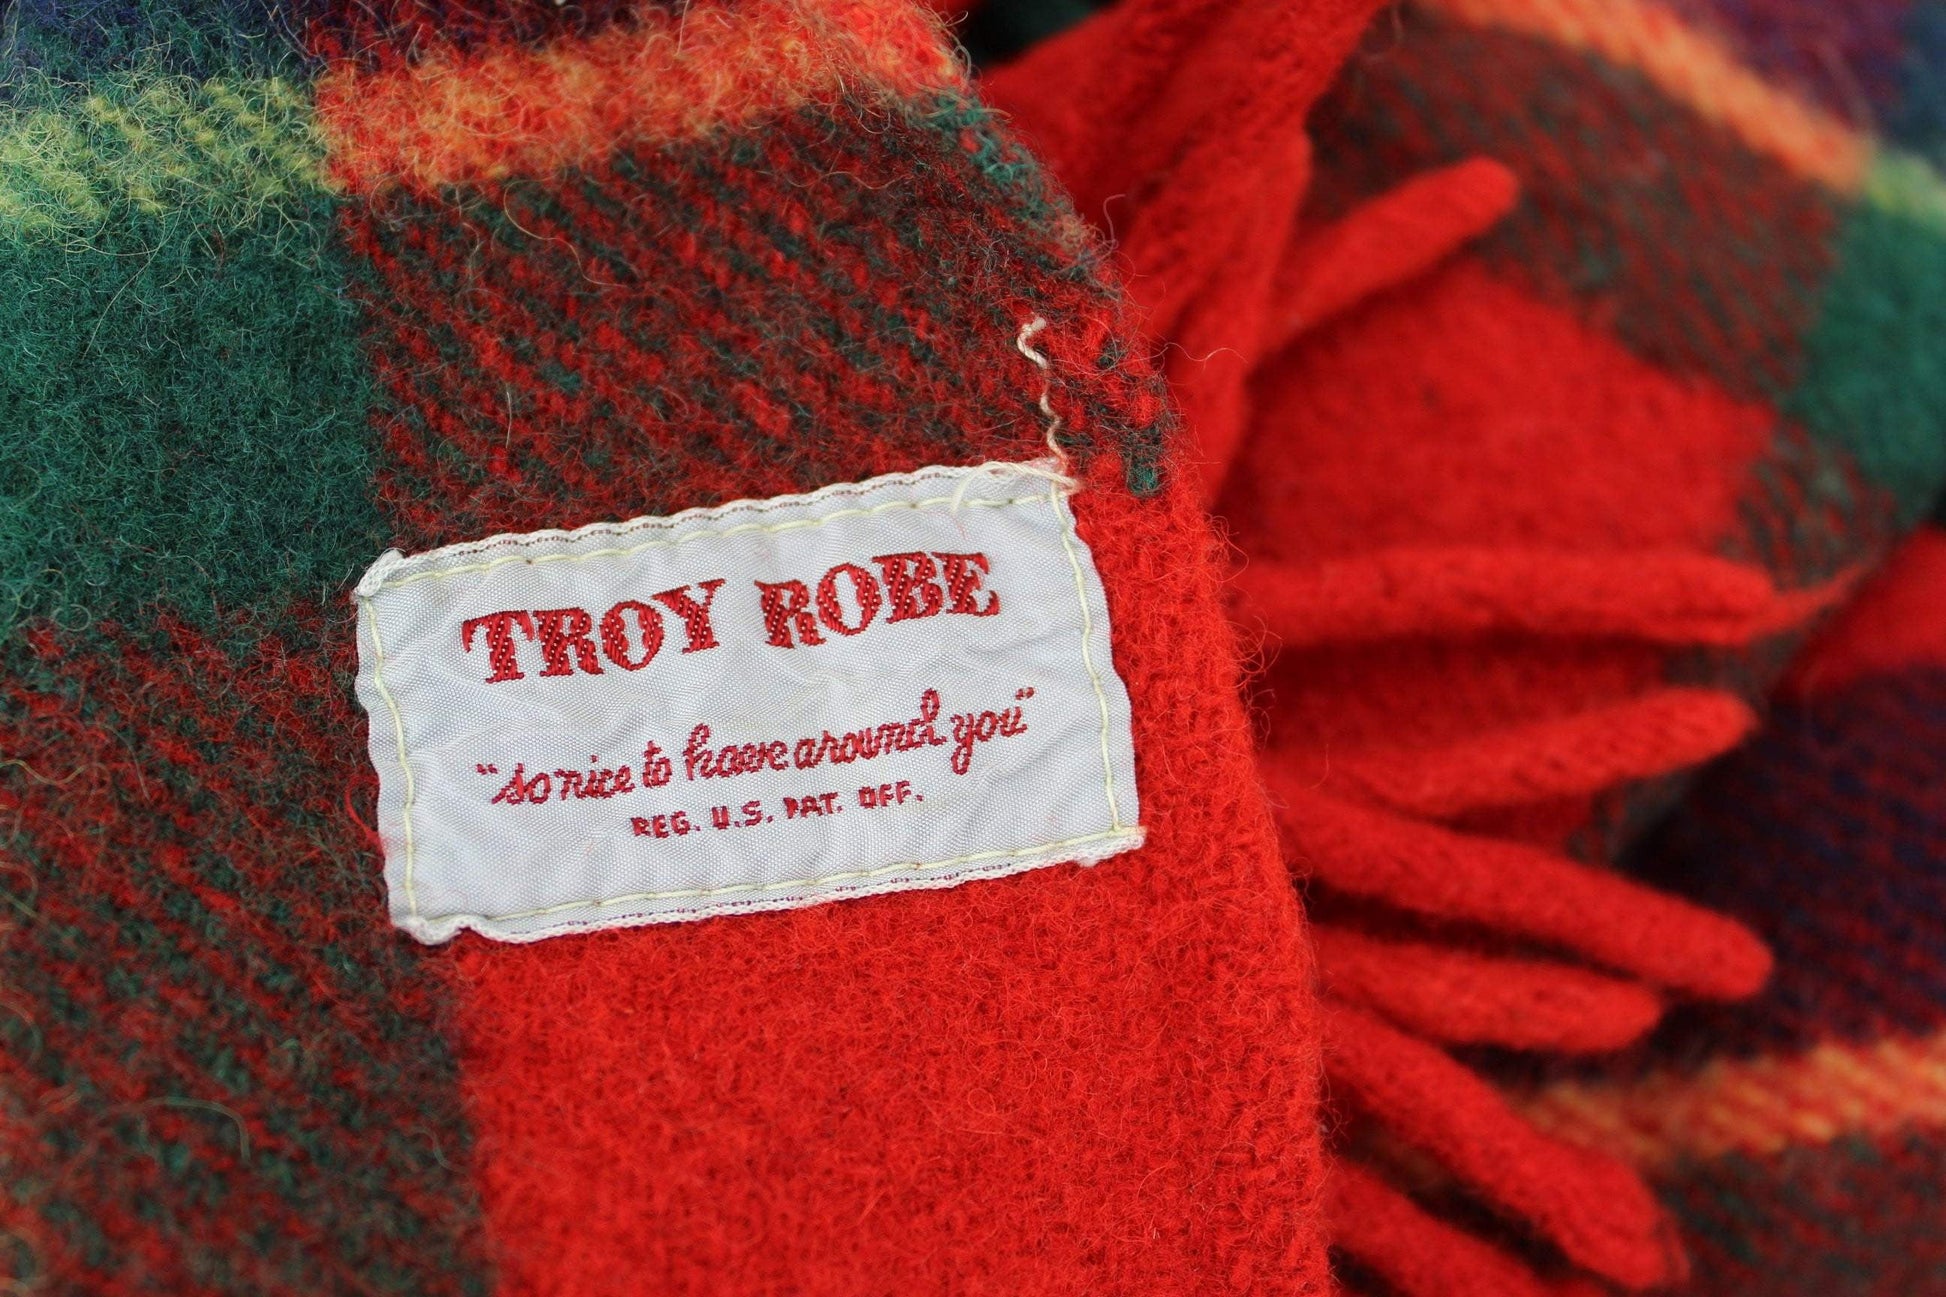 Troy Robe USA Wool Throw - Leisure Blanket Red Plaid Green Blue troy so nice to have around you